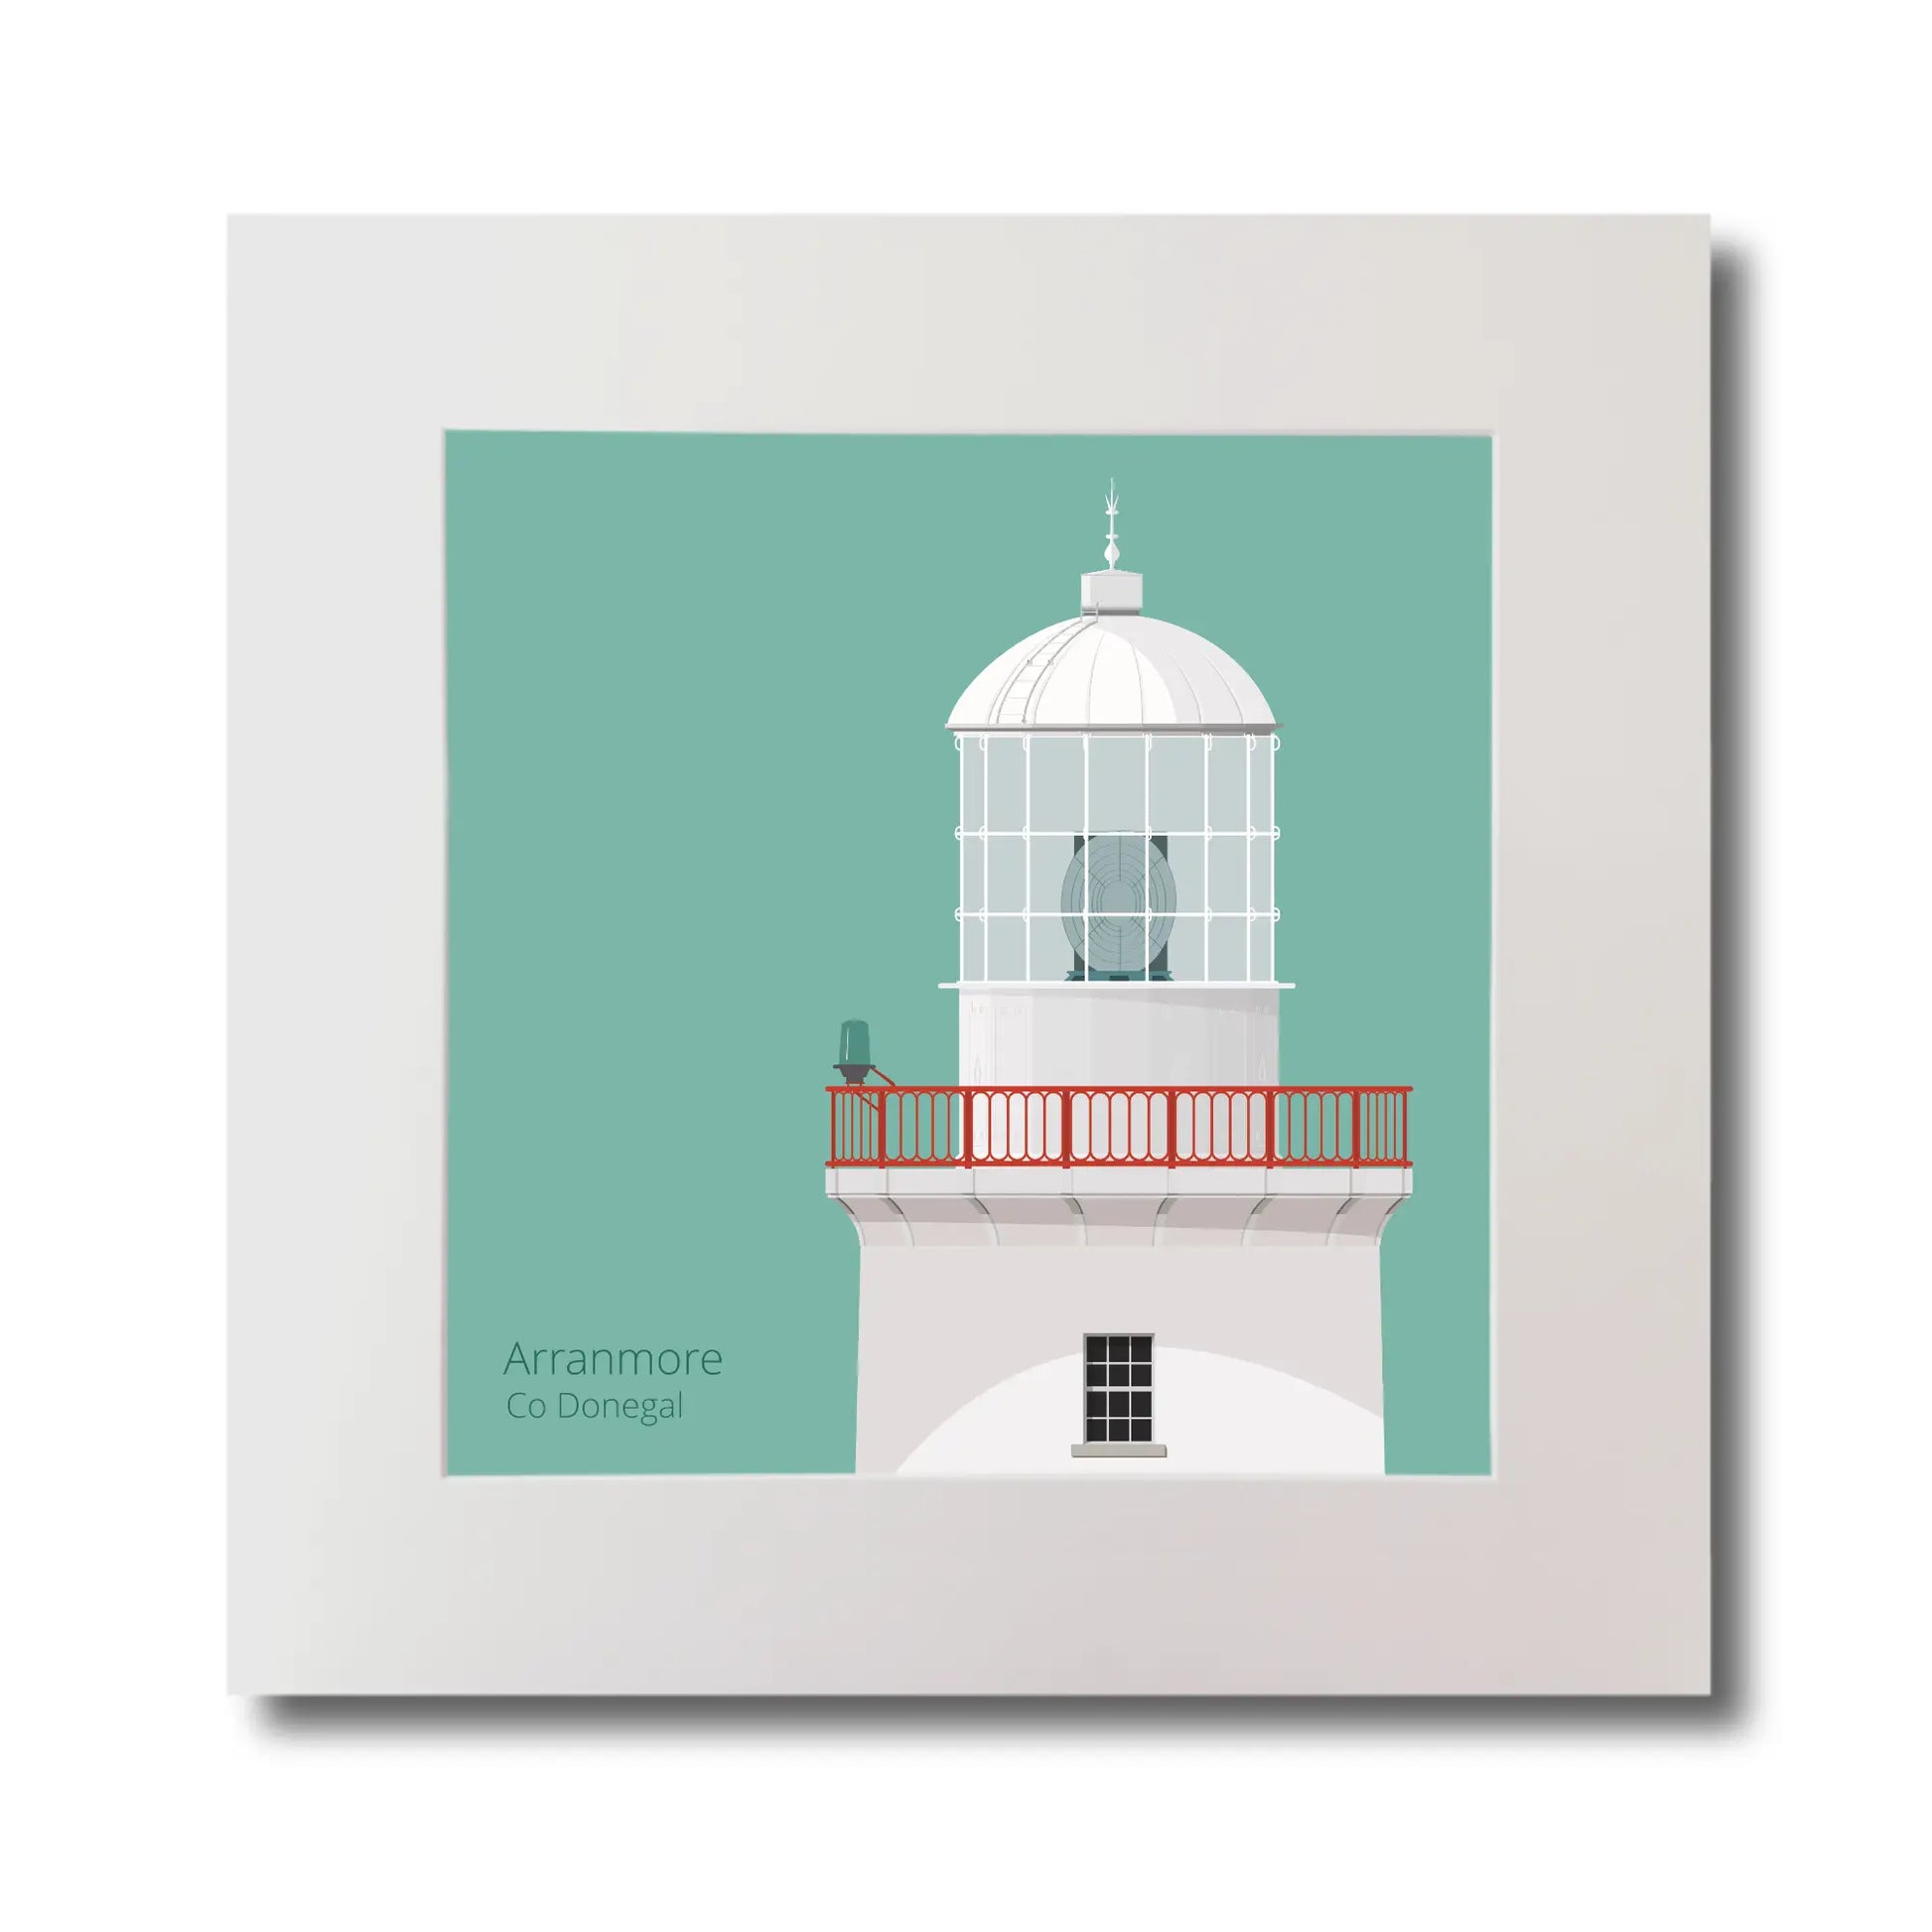 Illustration of Arranmore lighthouse on an ocean green background, mounted and measuring 30x30cm.